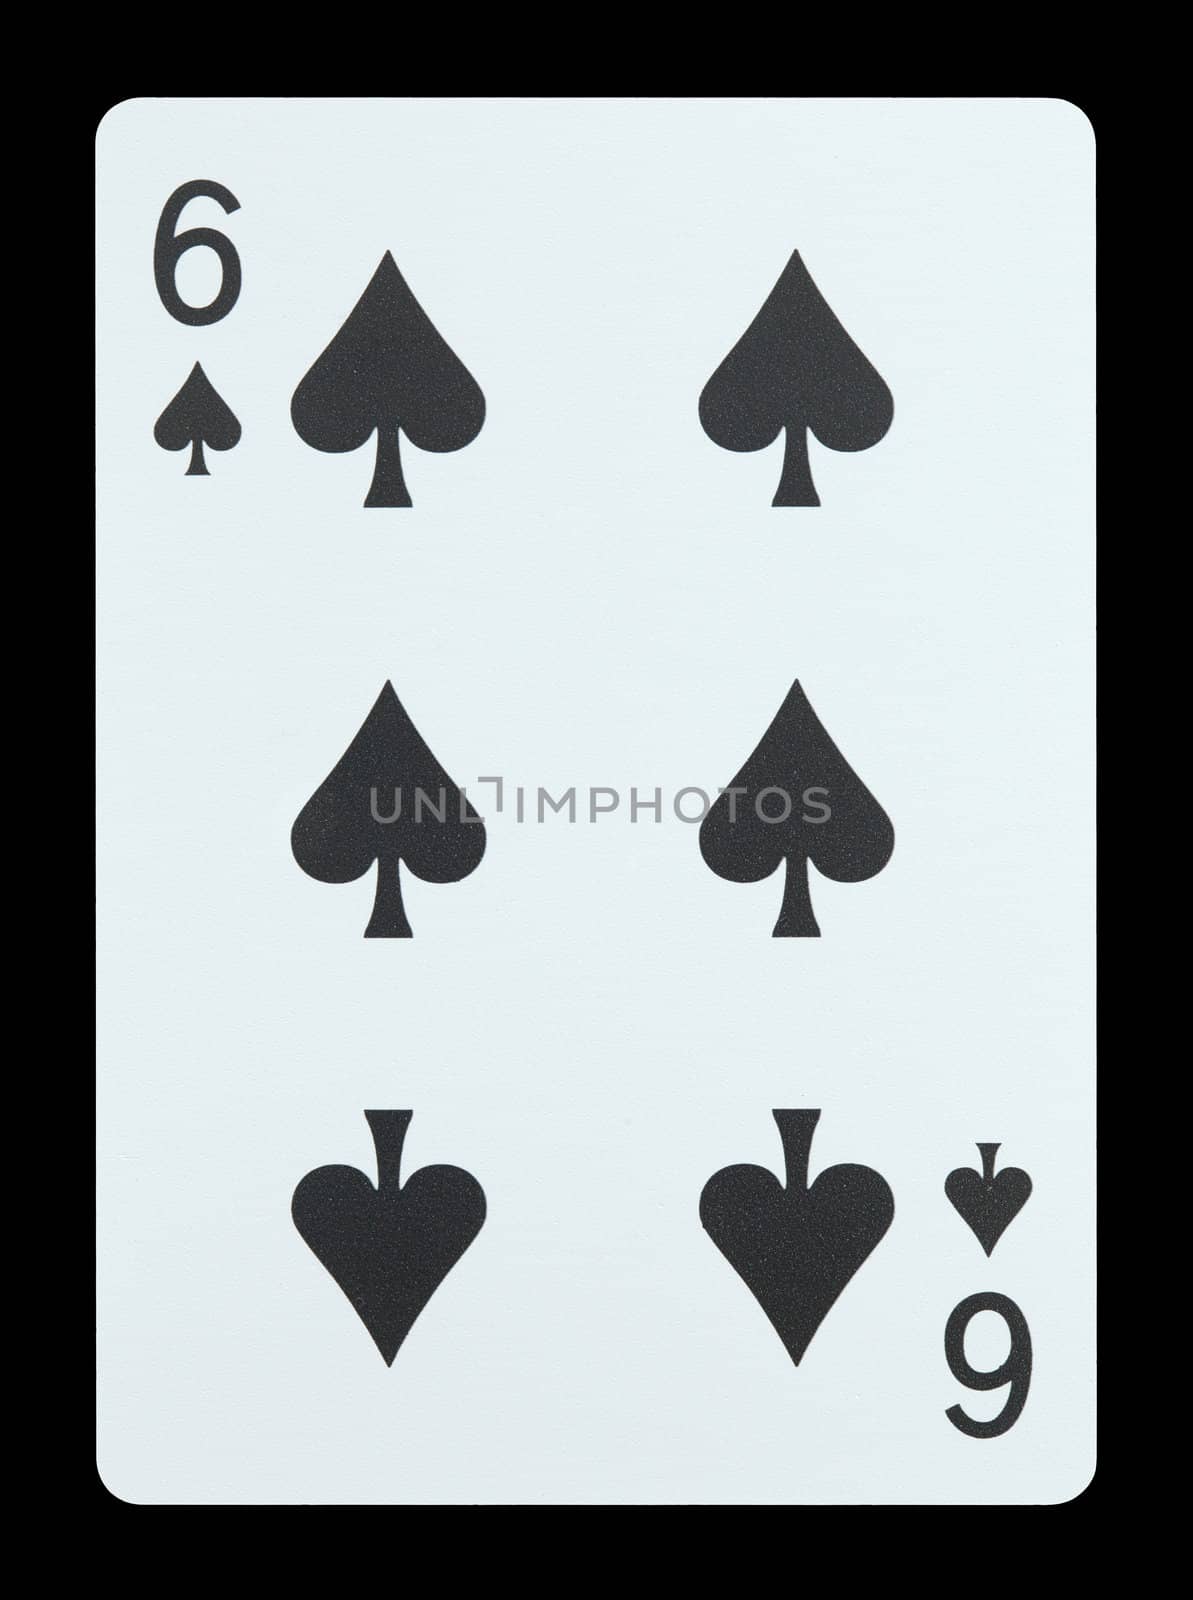 Playing cards - Six of spades